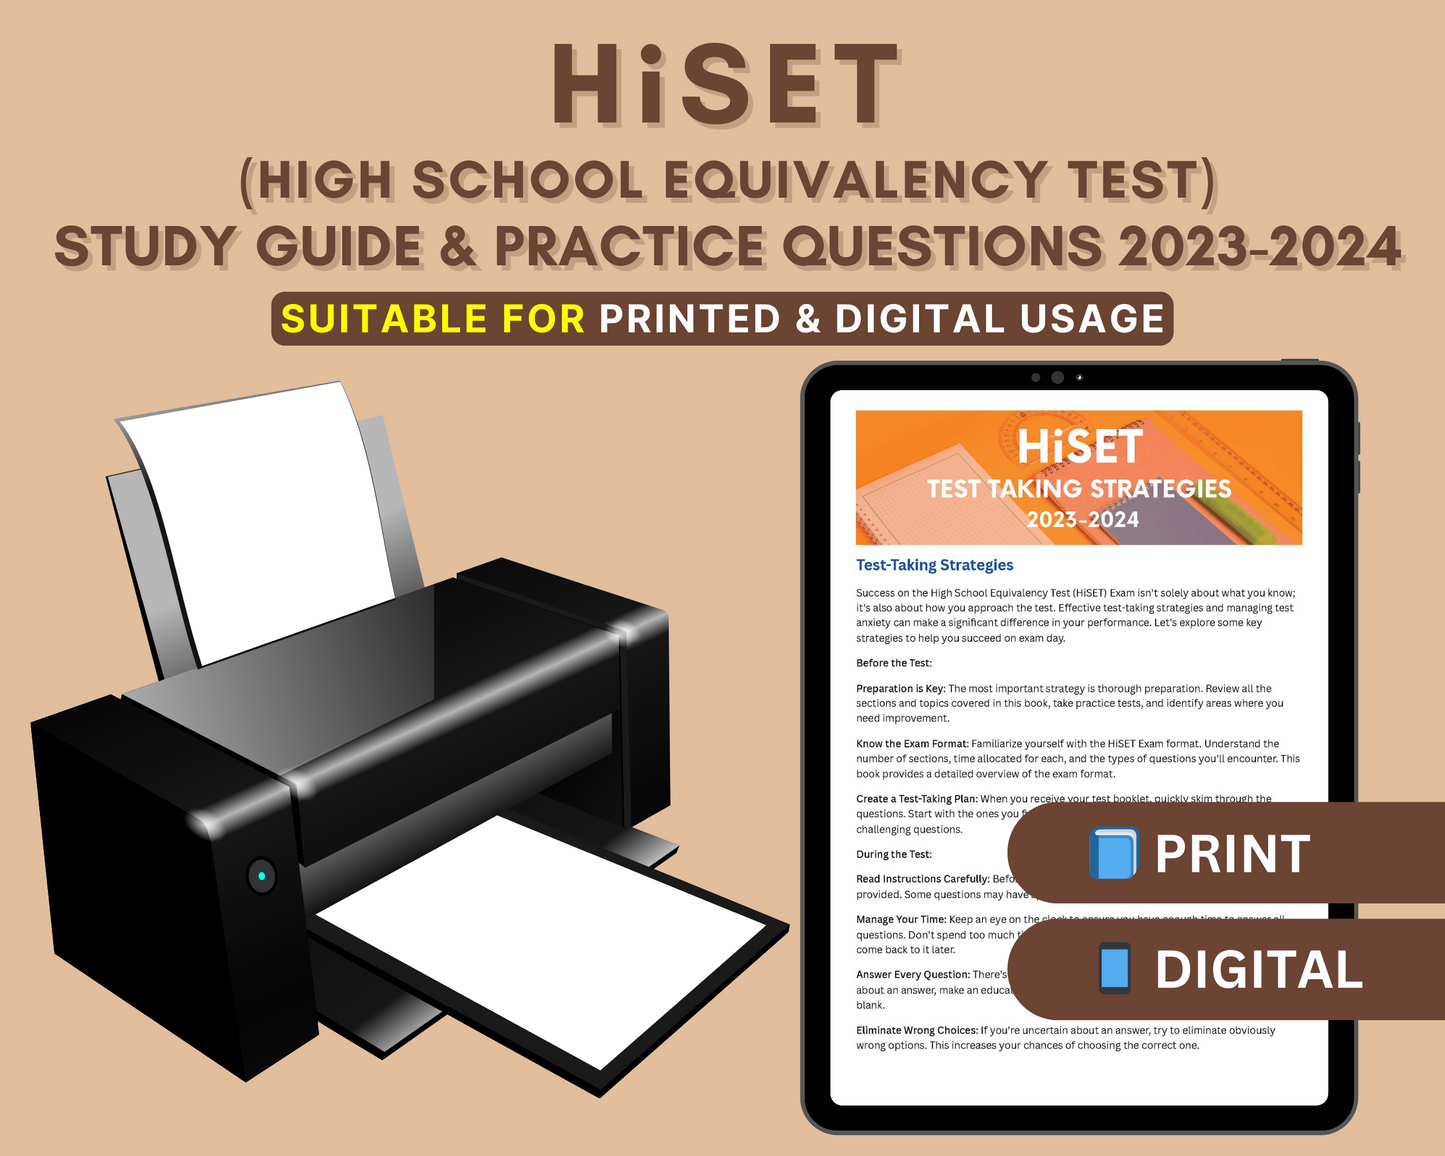 HiSET Exam Study Guide 2023-2024: In-Depth Content Review, Practice Tests & Exam Tips for High School Equivalency Test